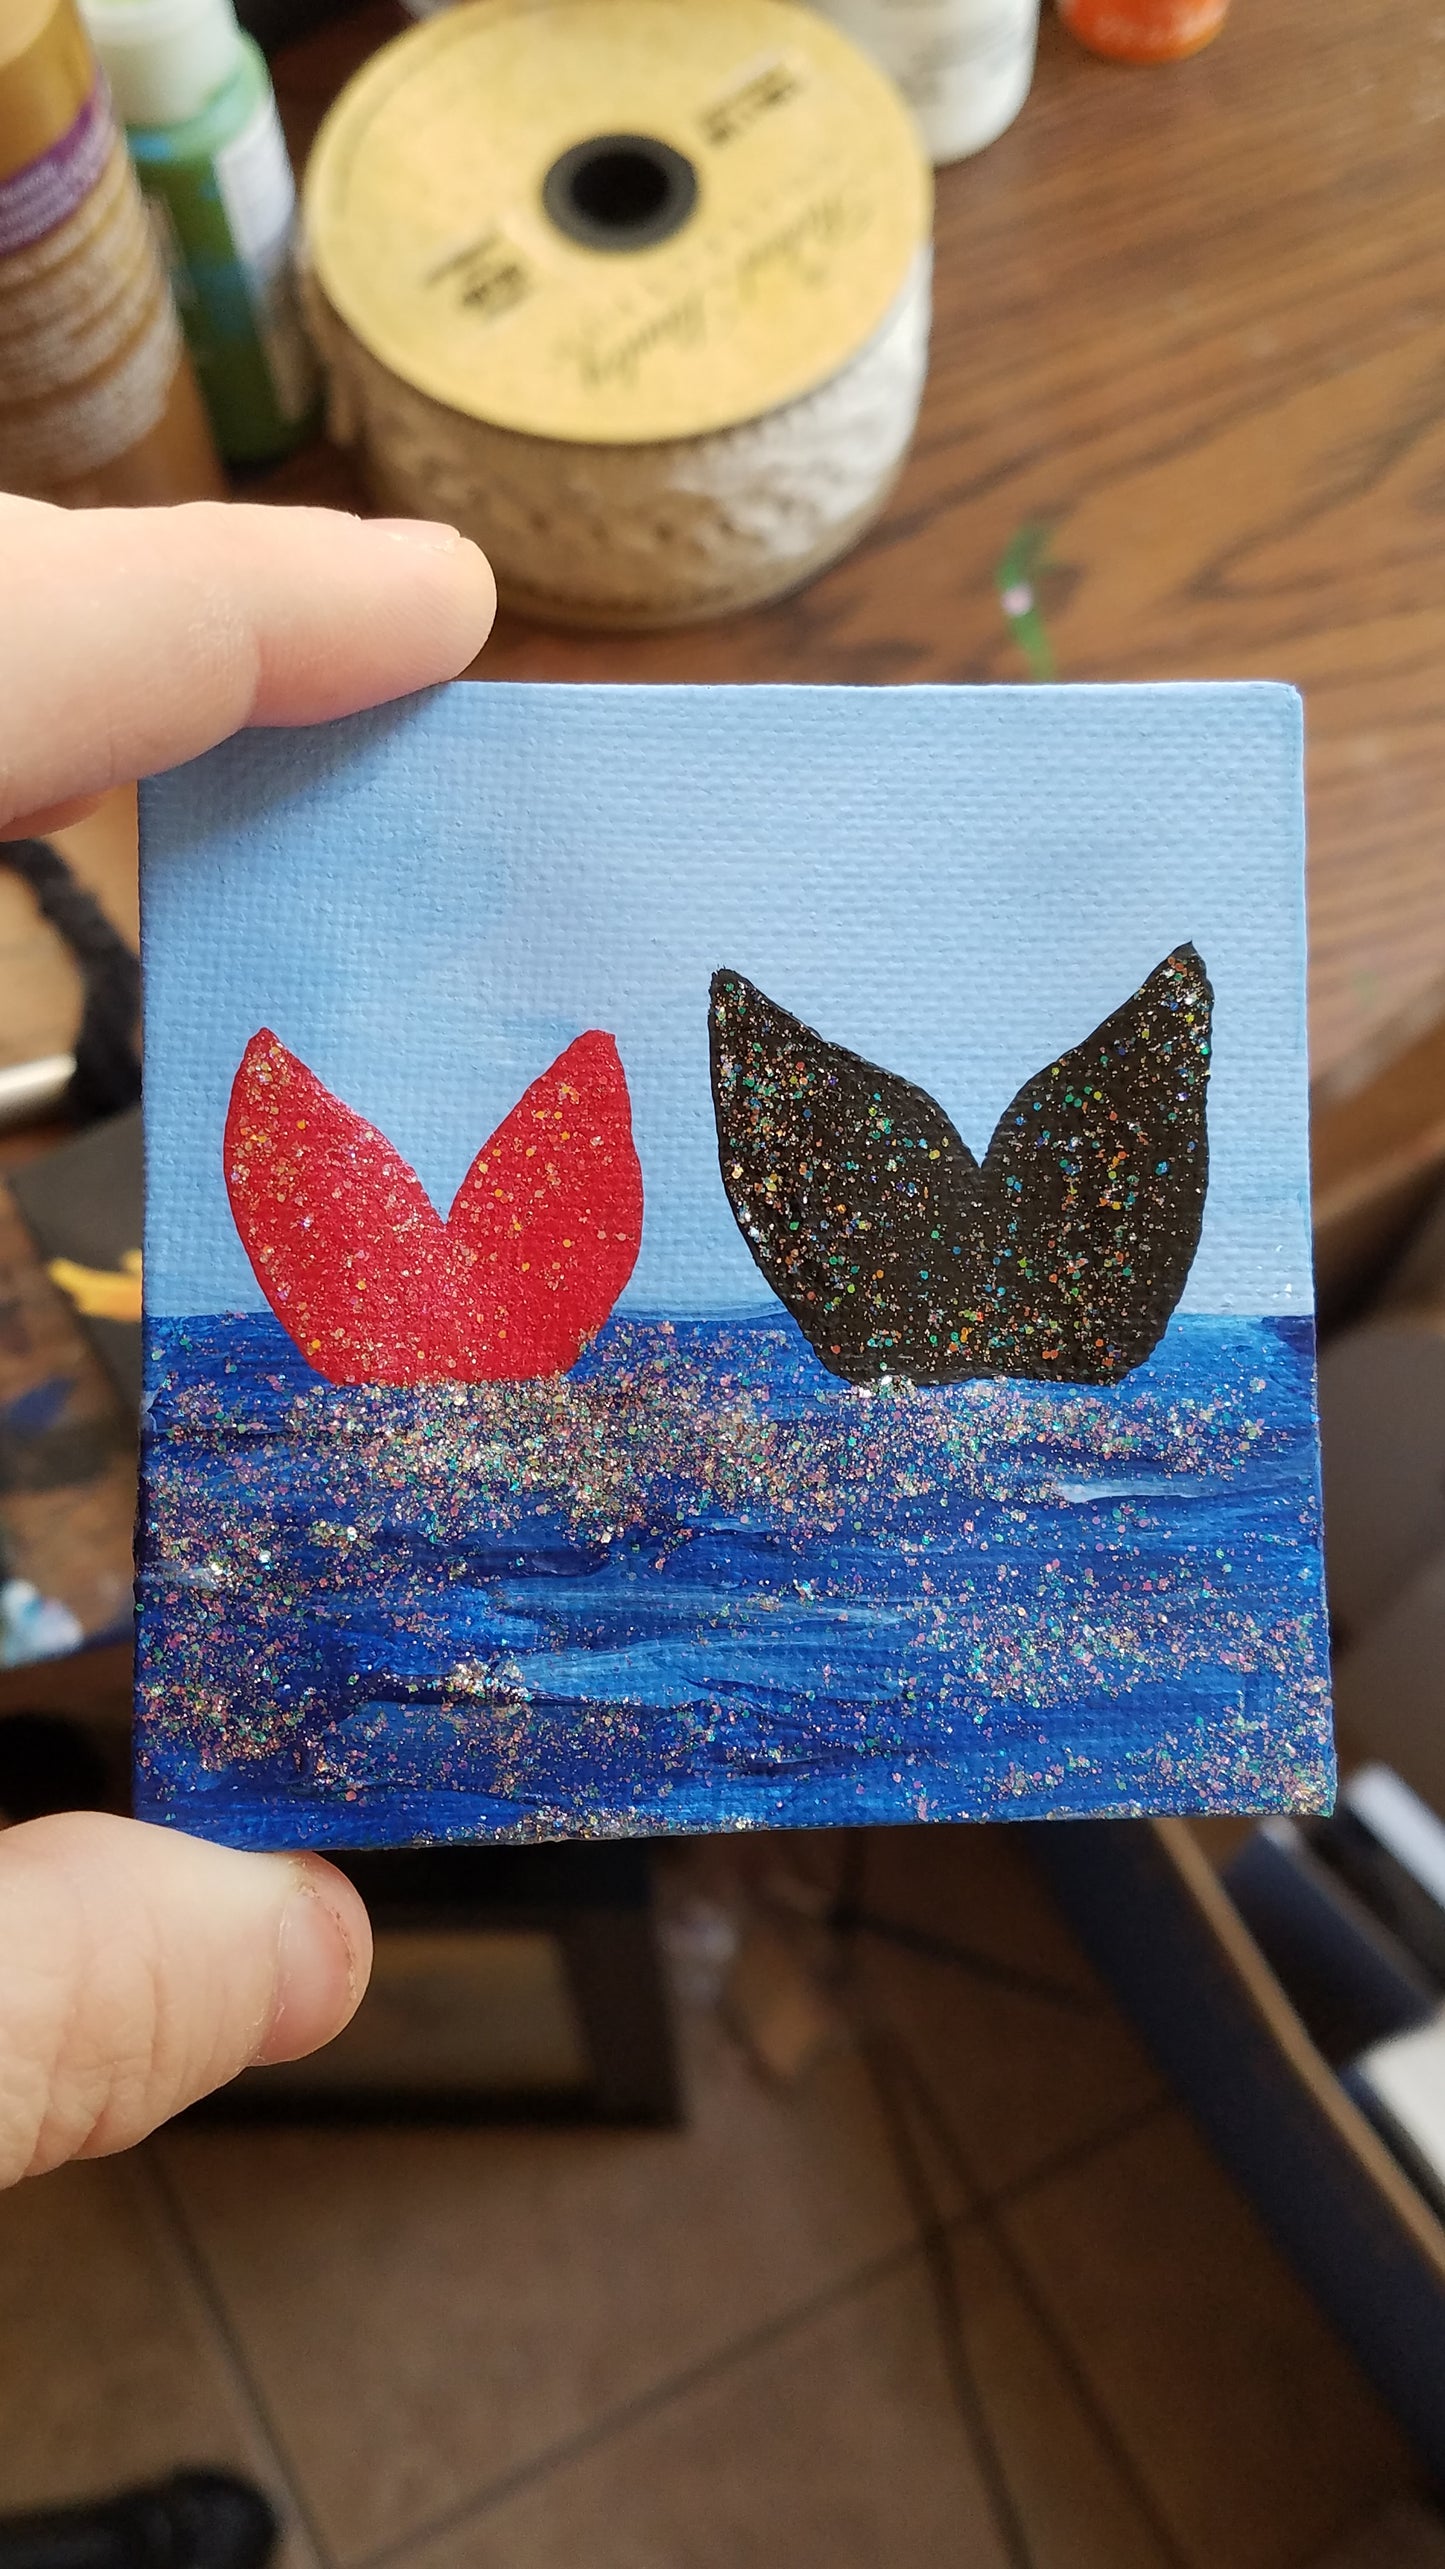 Mermaid Friends Tails Red and Black Glitter Easel Painting